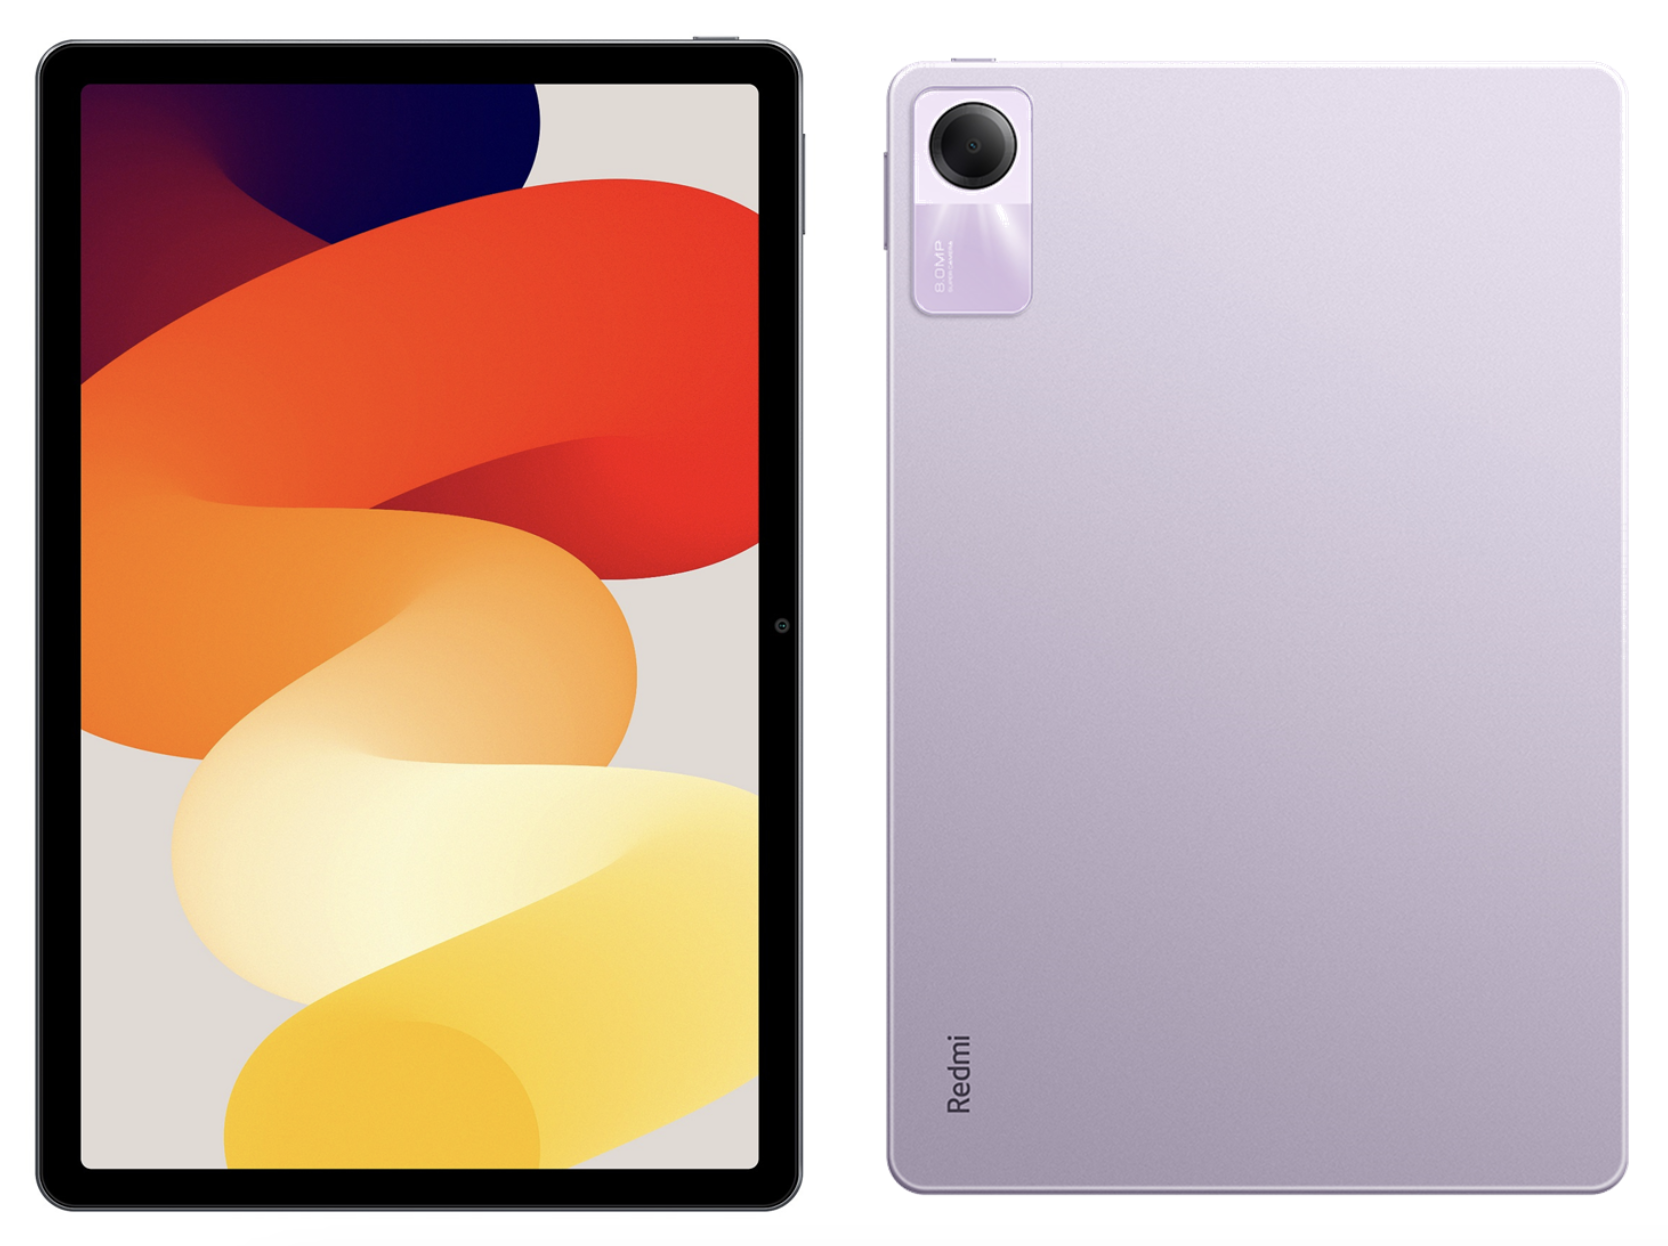 The Redmi Pad could take the fight to cheaper Android tablets